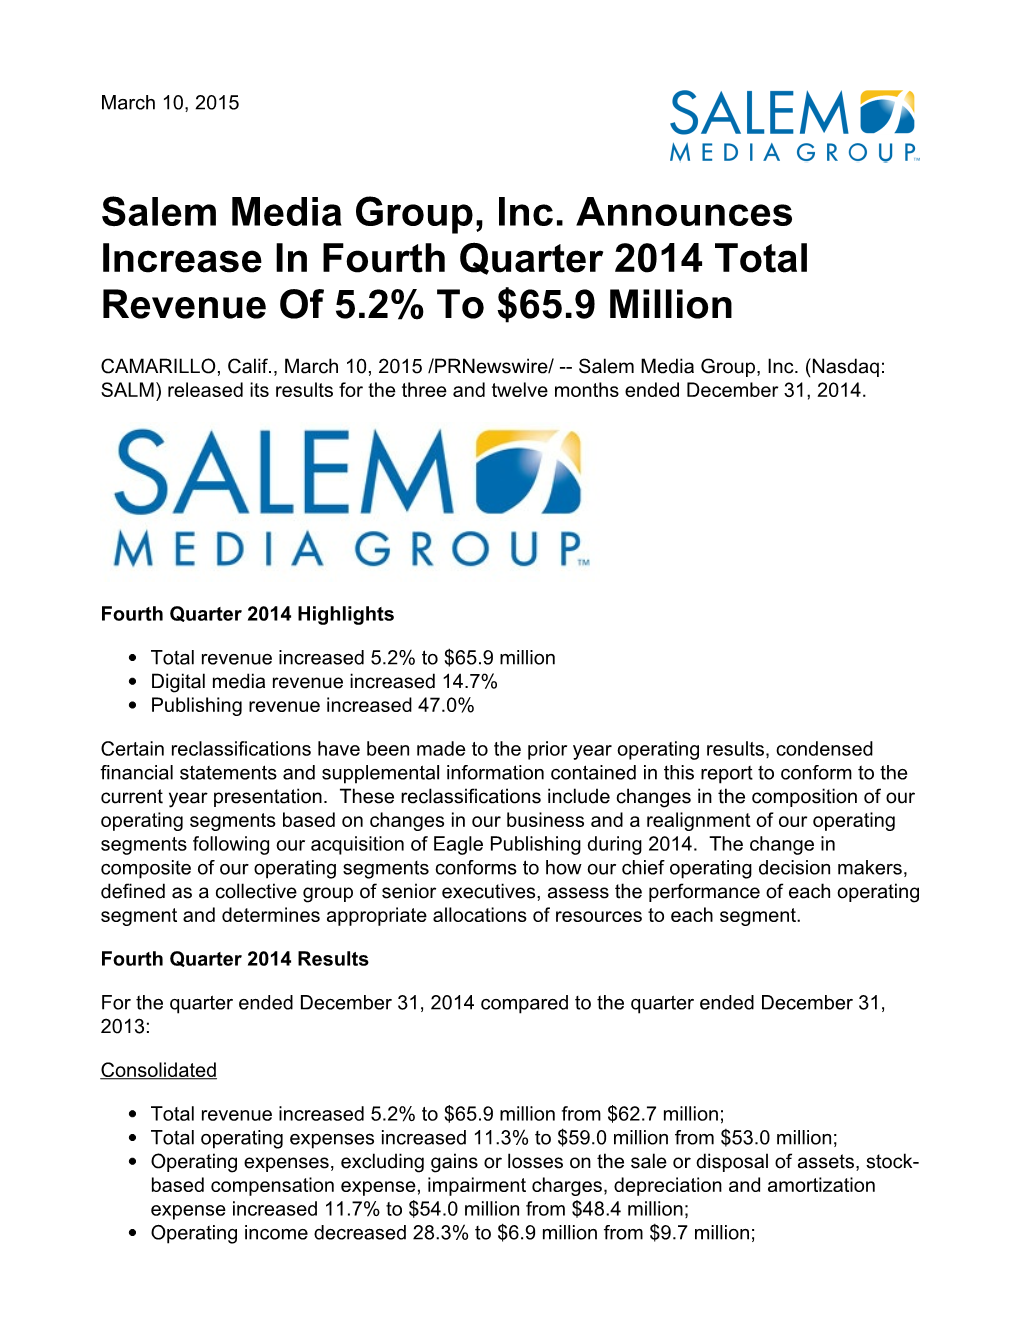 Salem Media Group, Inc. Announces Increase in Fourth Quarter 2014 Total Revenue of 5.2% to $65.9 Million